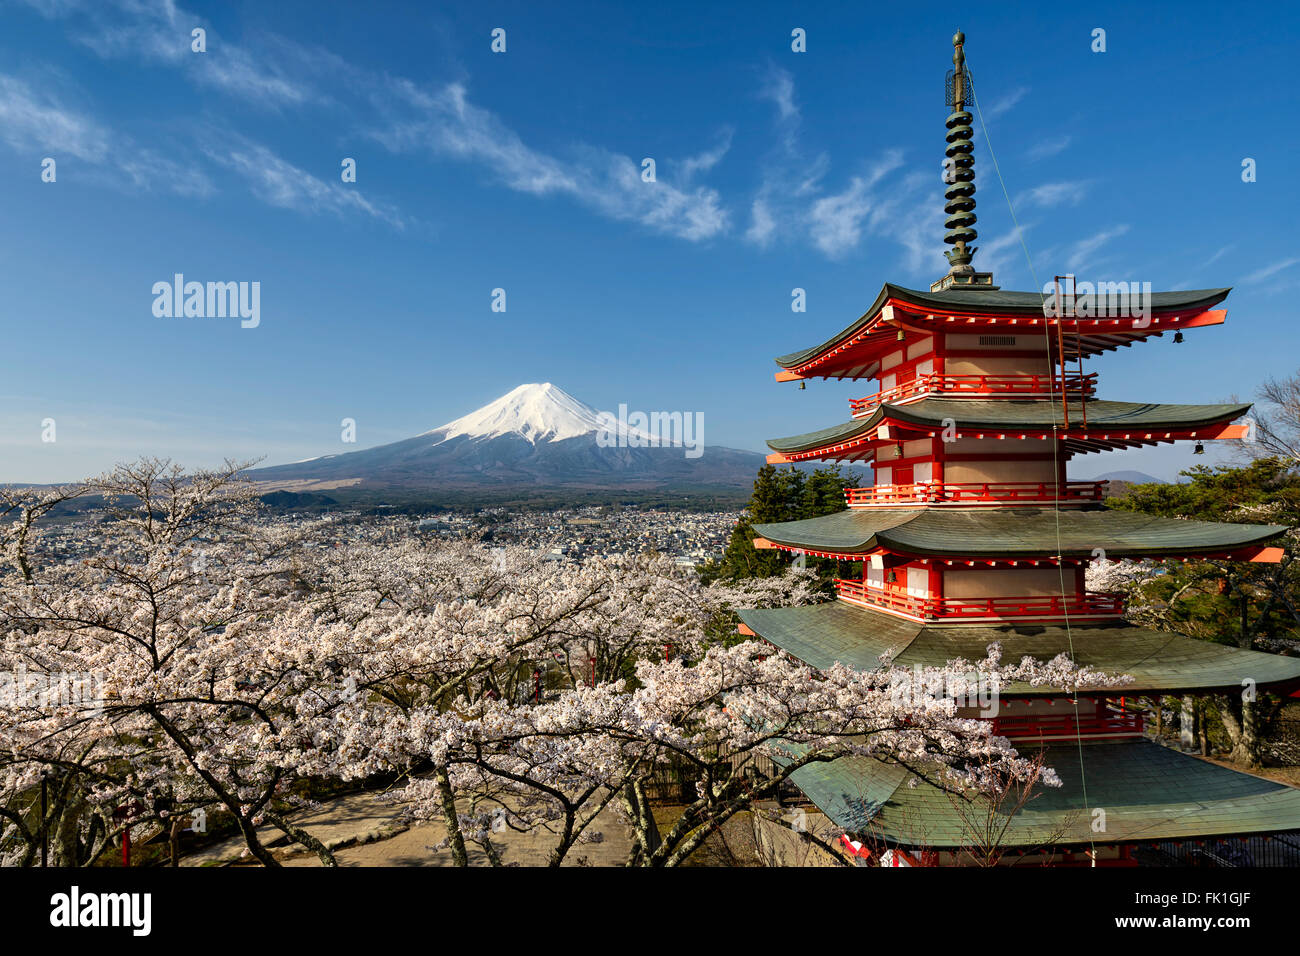 Mount Fuji with a red pagoda in spring season with cherry blossoms, Japan Stock Photo